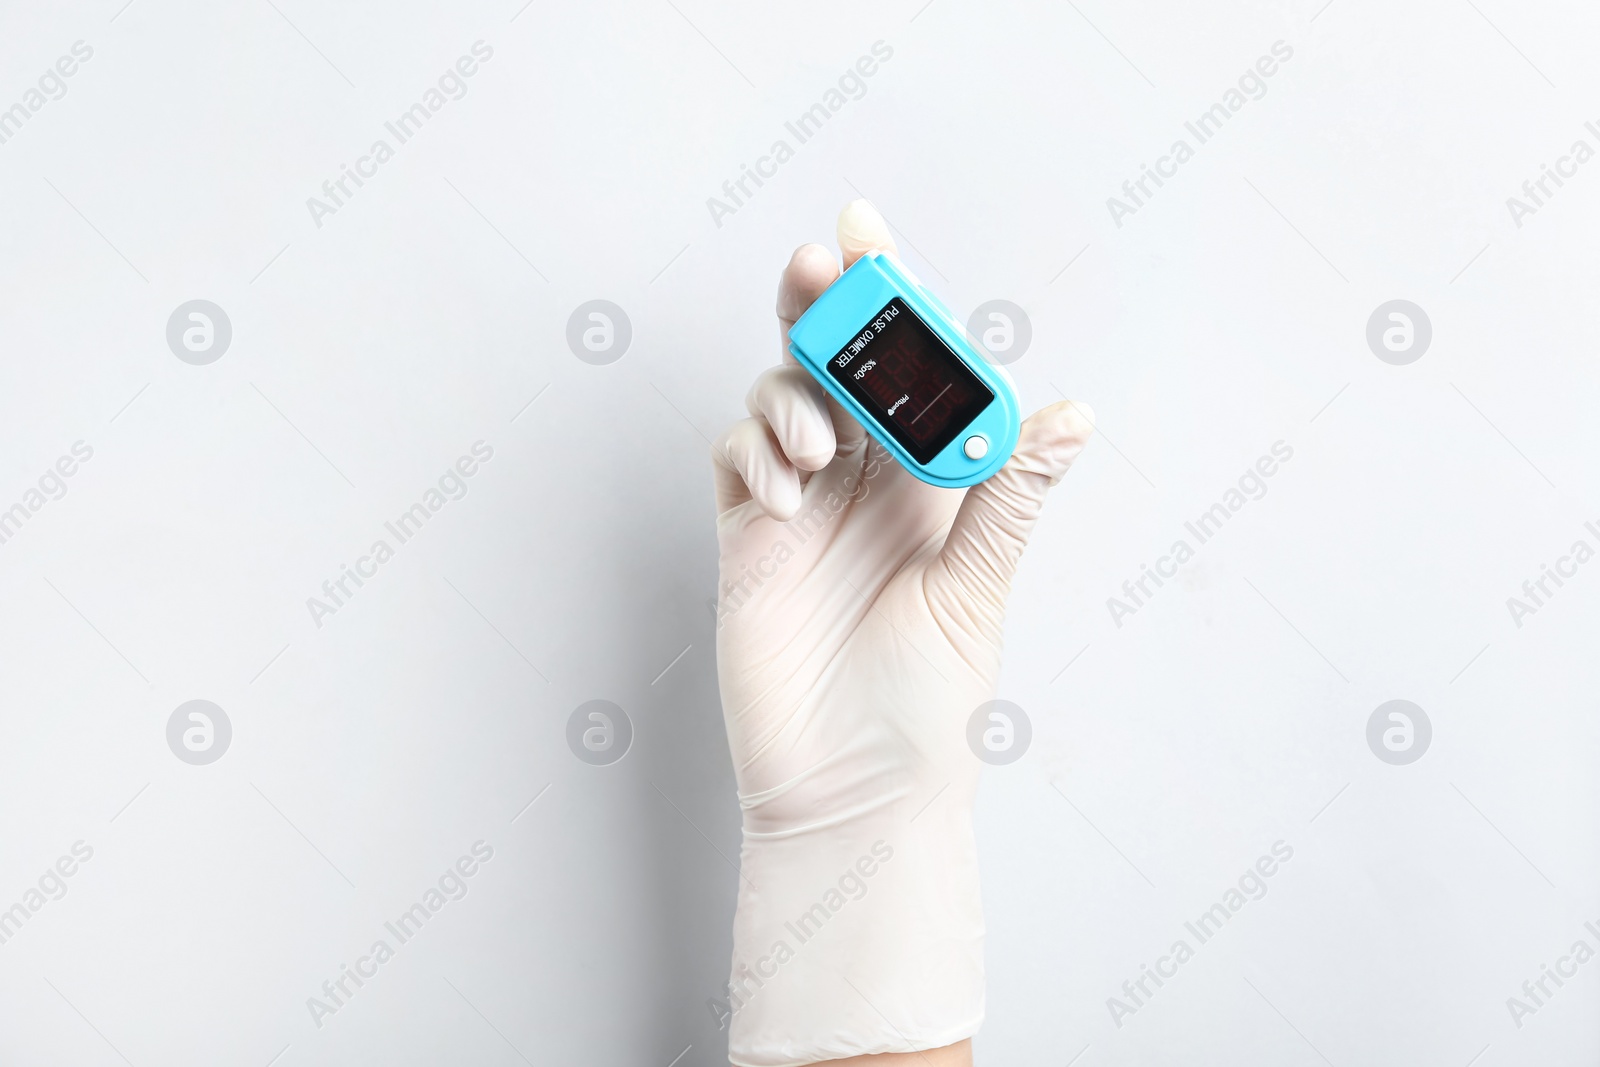 Photo of Doctor in gloves holding fingertip pulse oximeter on white background, closeup